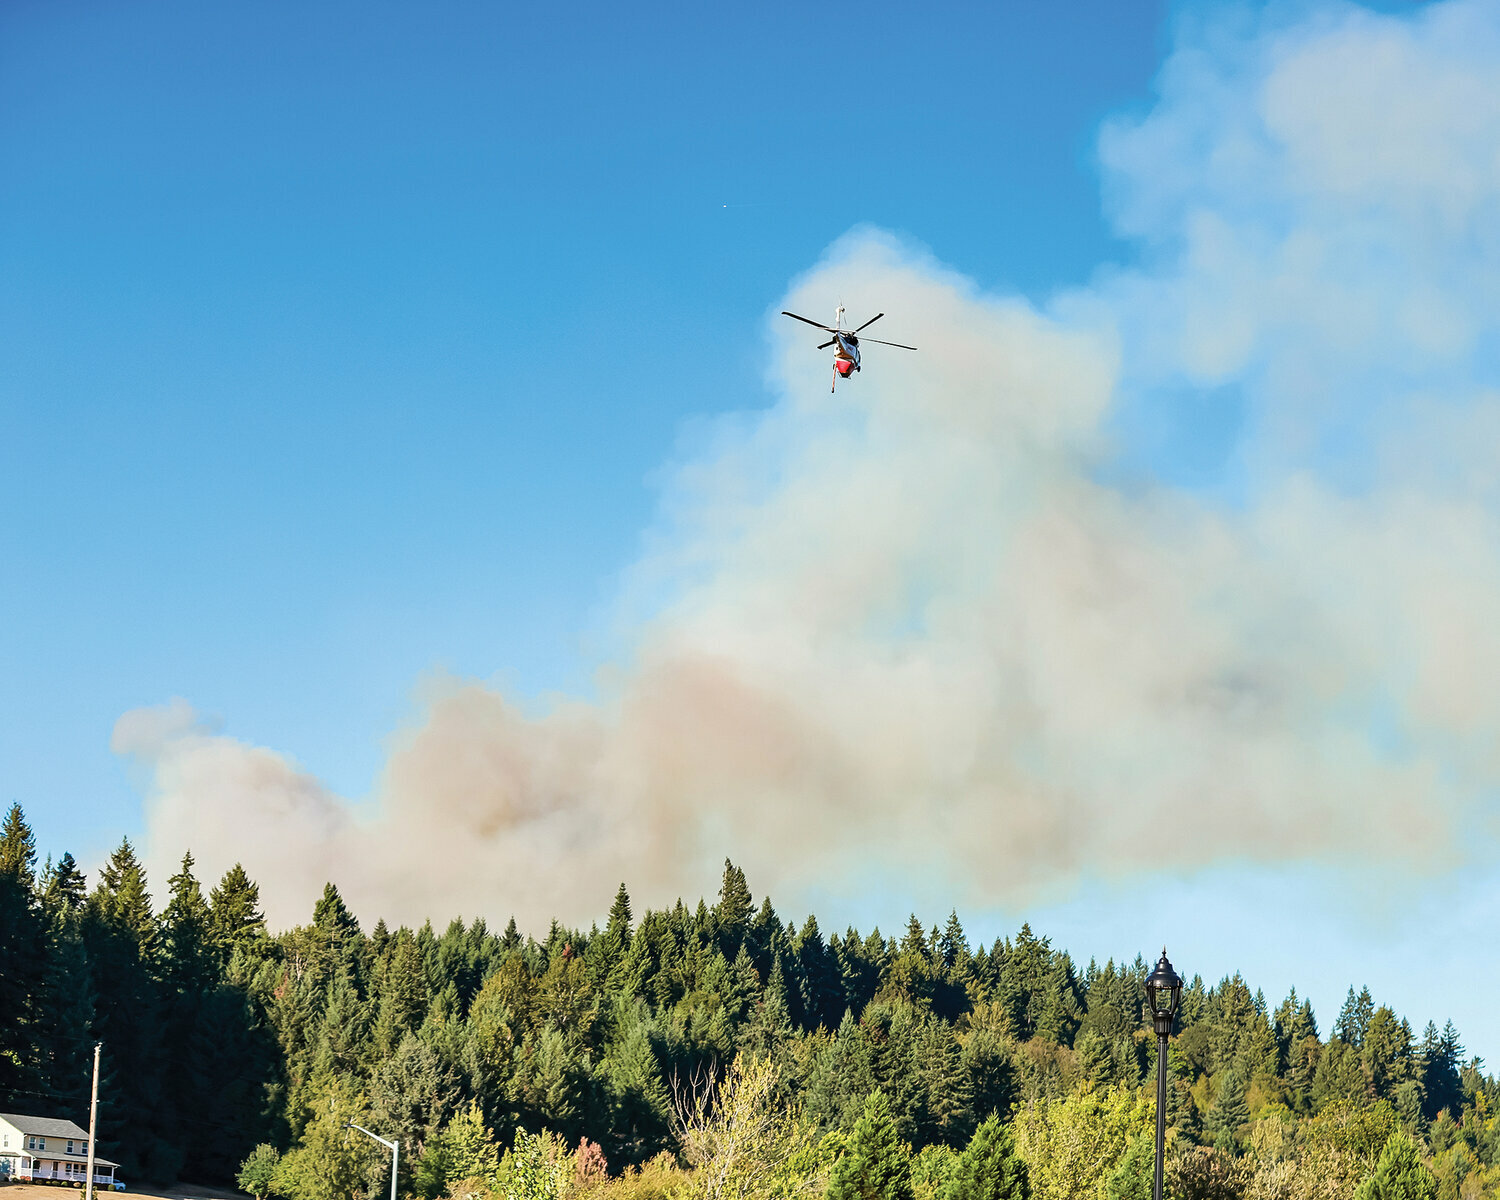 A helicopter aids in the firefighting effort during the La Center wildfire in August. The La Center fire burned 34 acres of property and caused evacuations on Aug. 16.